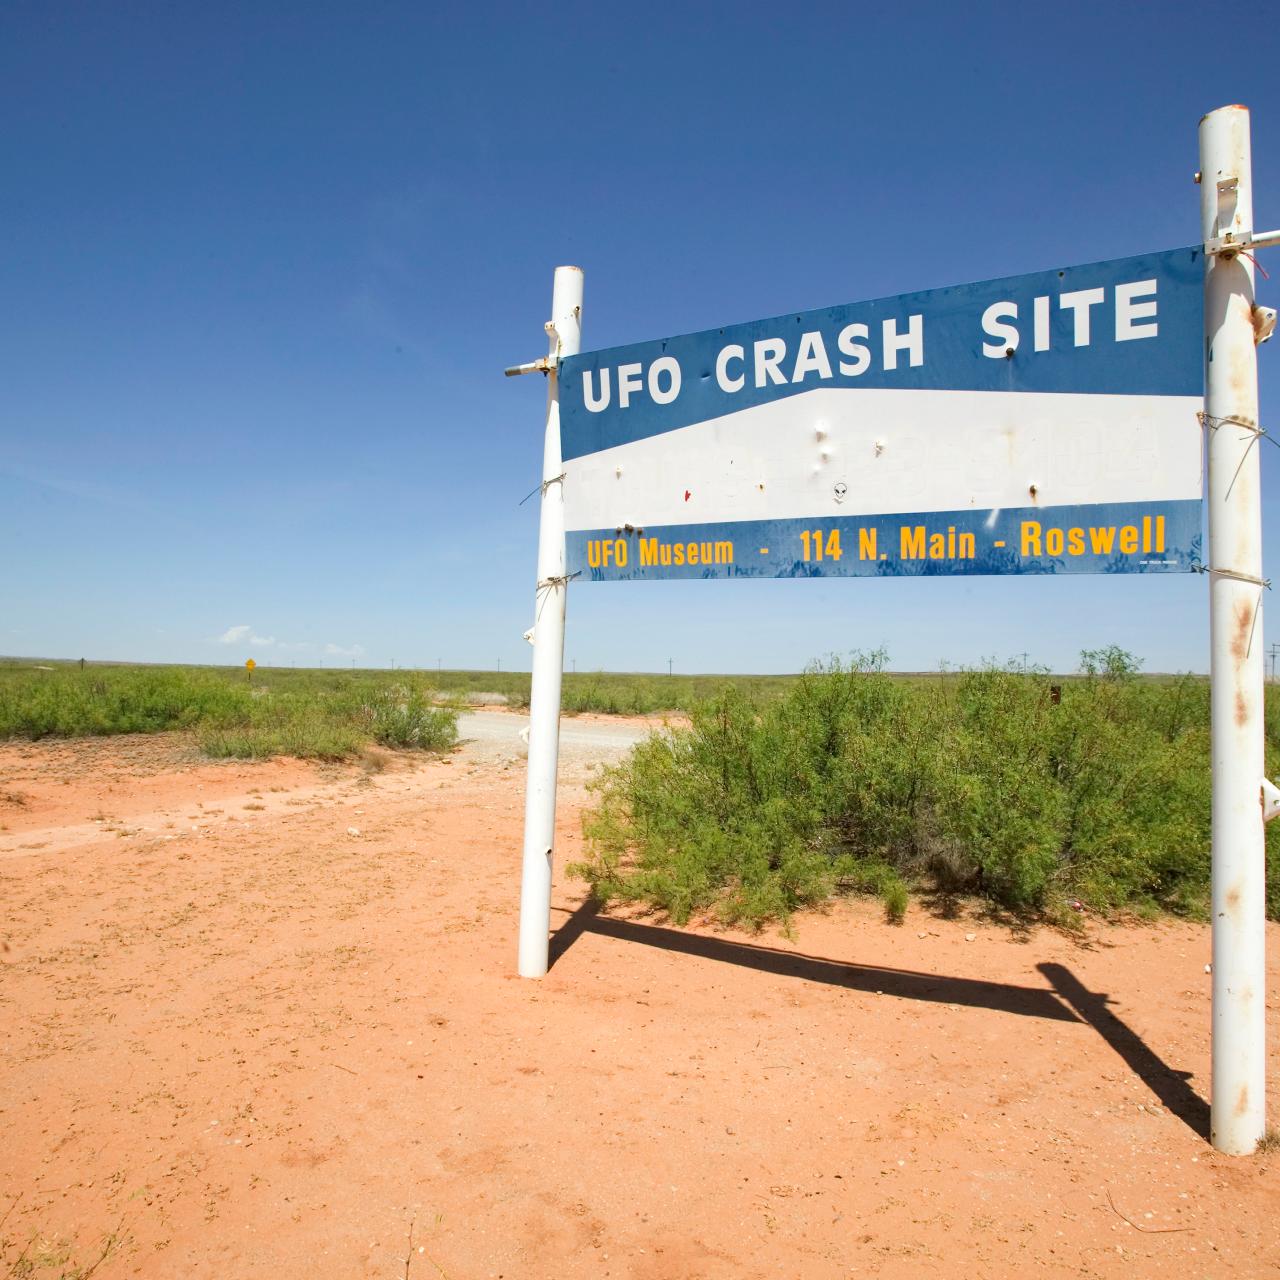 Aircraft Crash Locations in New Mexico